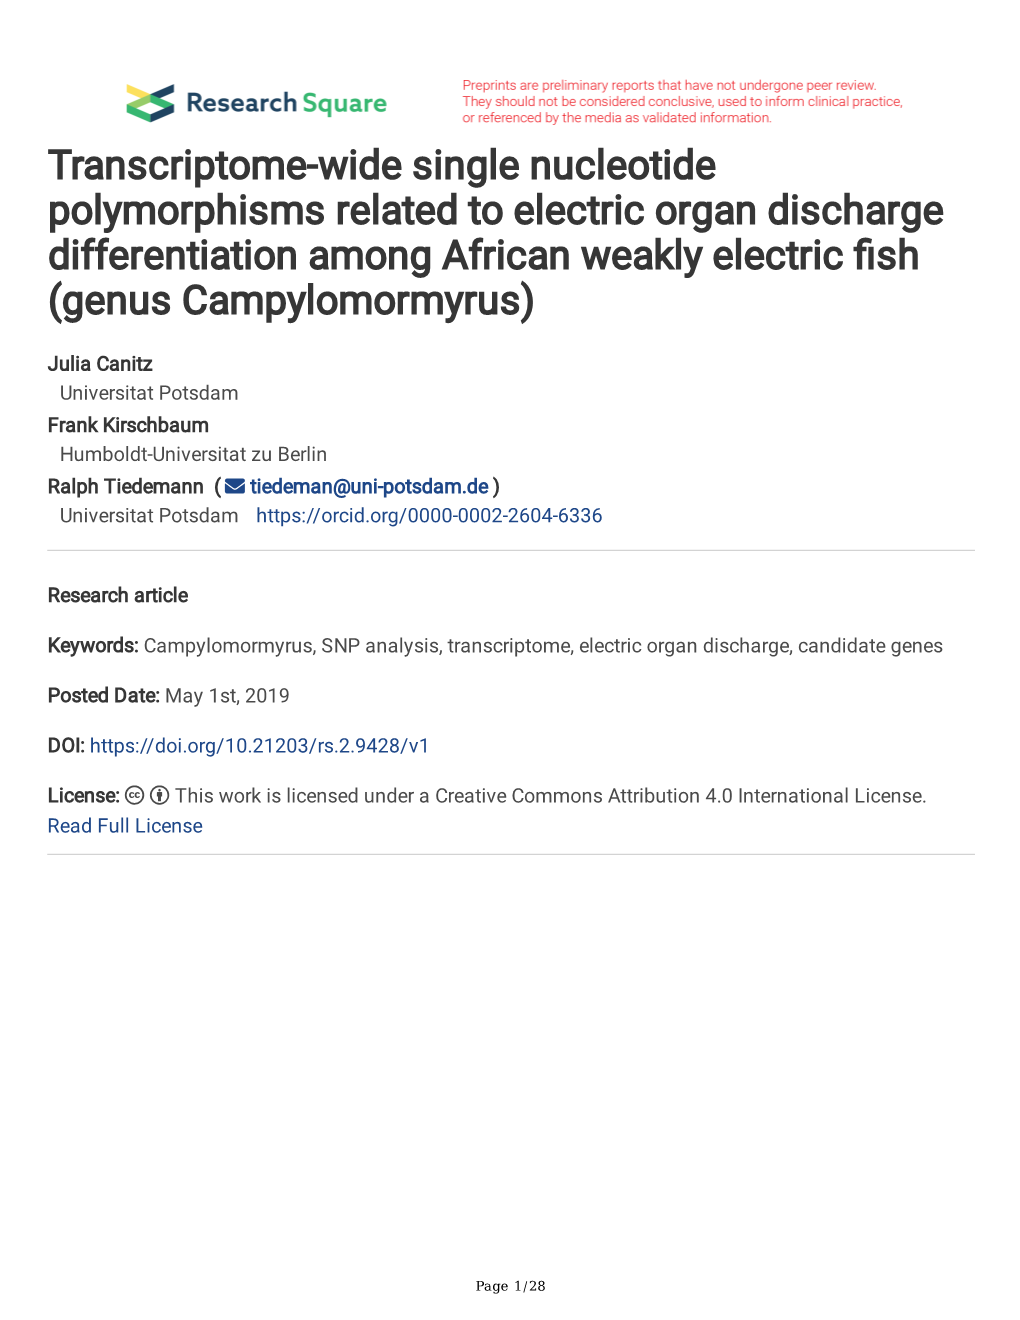 Transcriptome-Wide Single Nucleotide Polymorphisms Related to Electric Organ Discharge Differentiation Among African Weakly Electric Fsh (Genus Campylomormyrus)